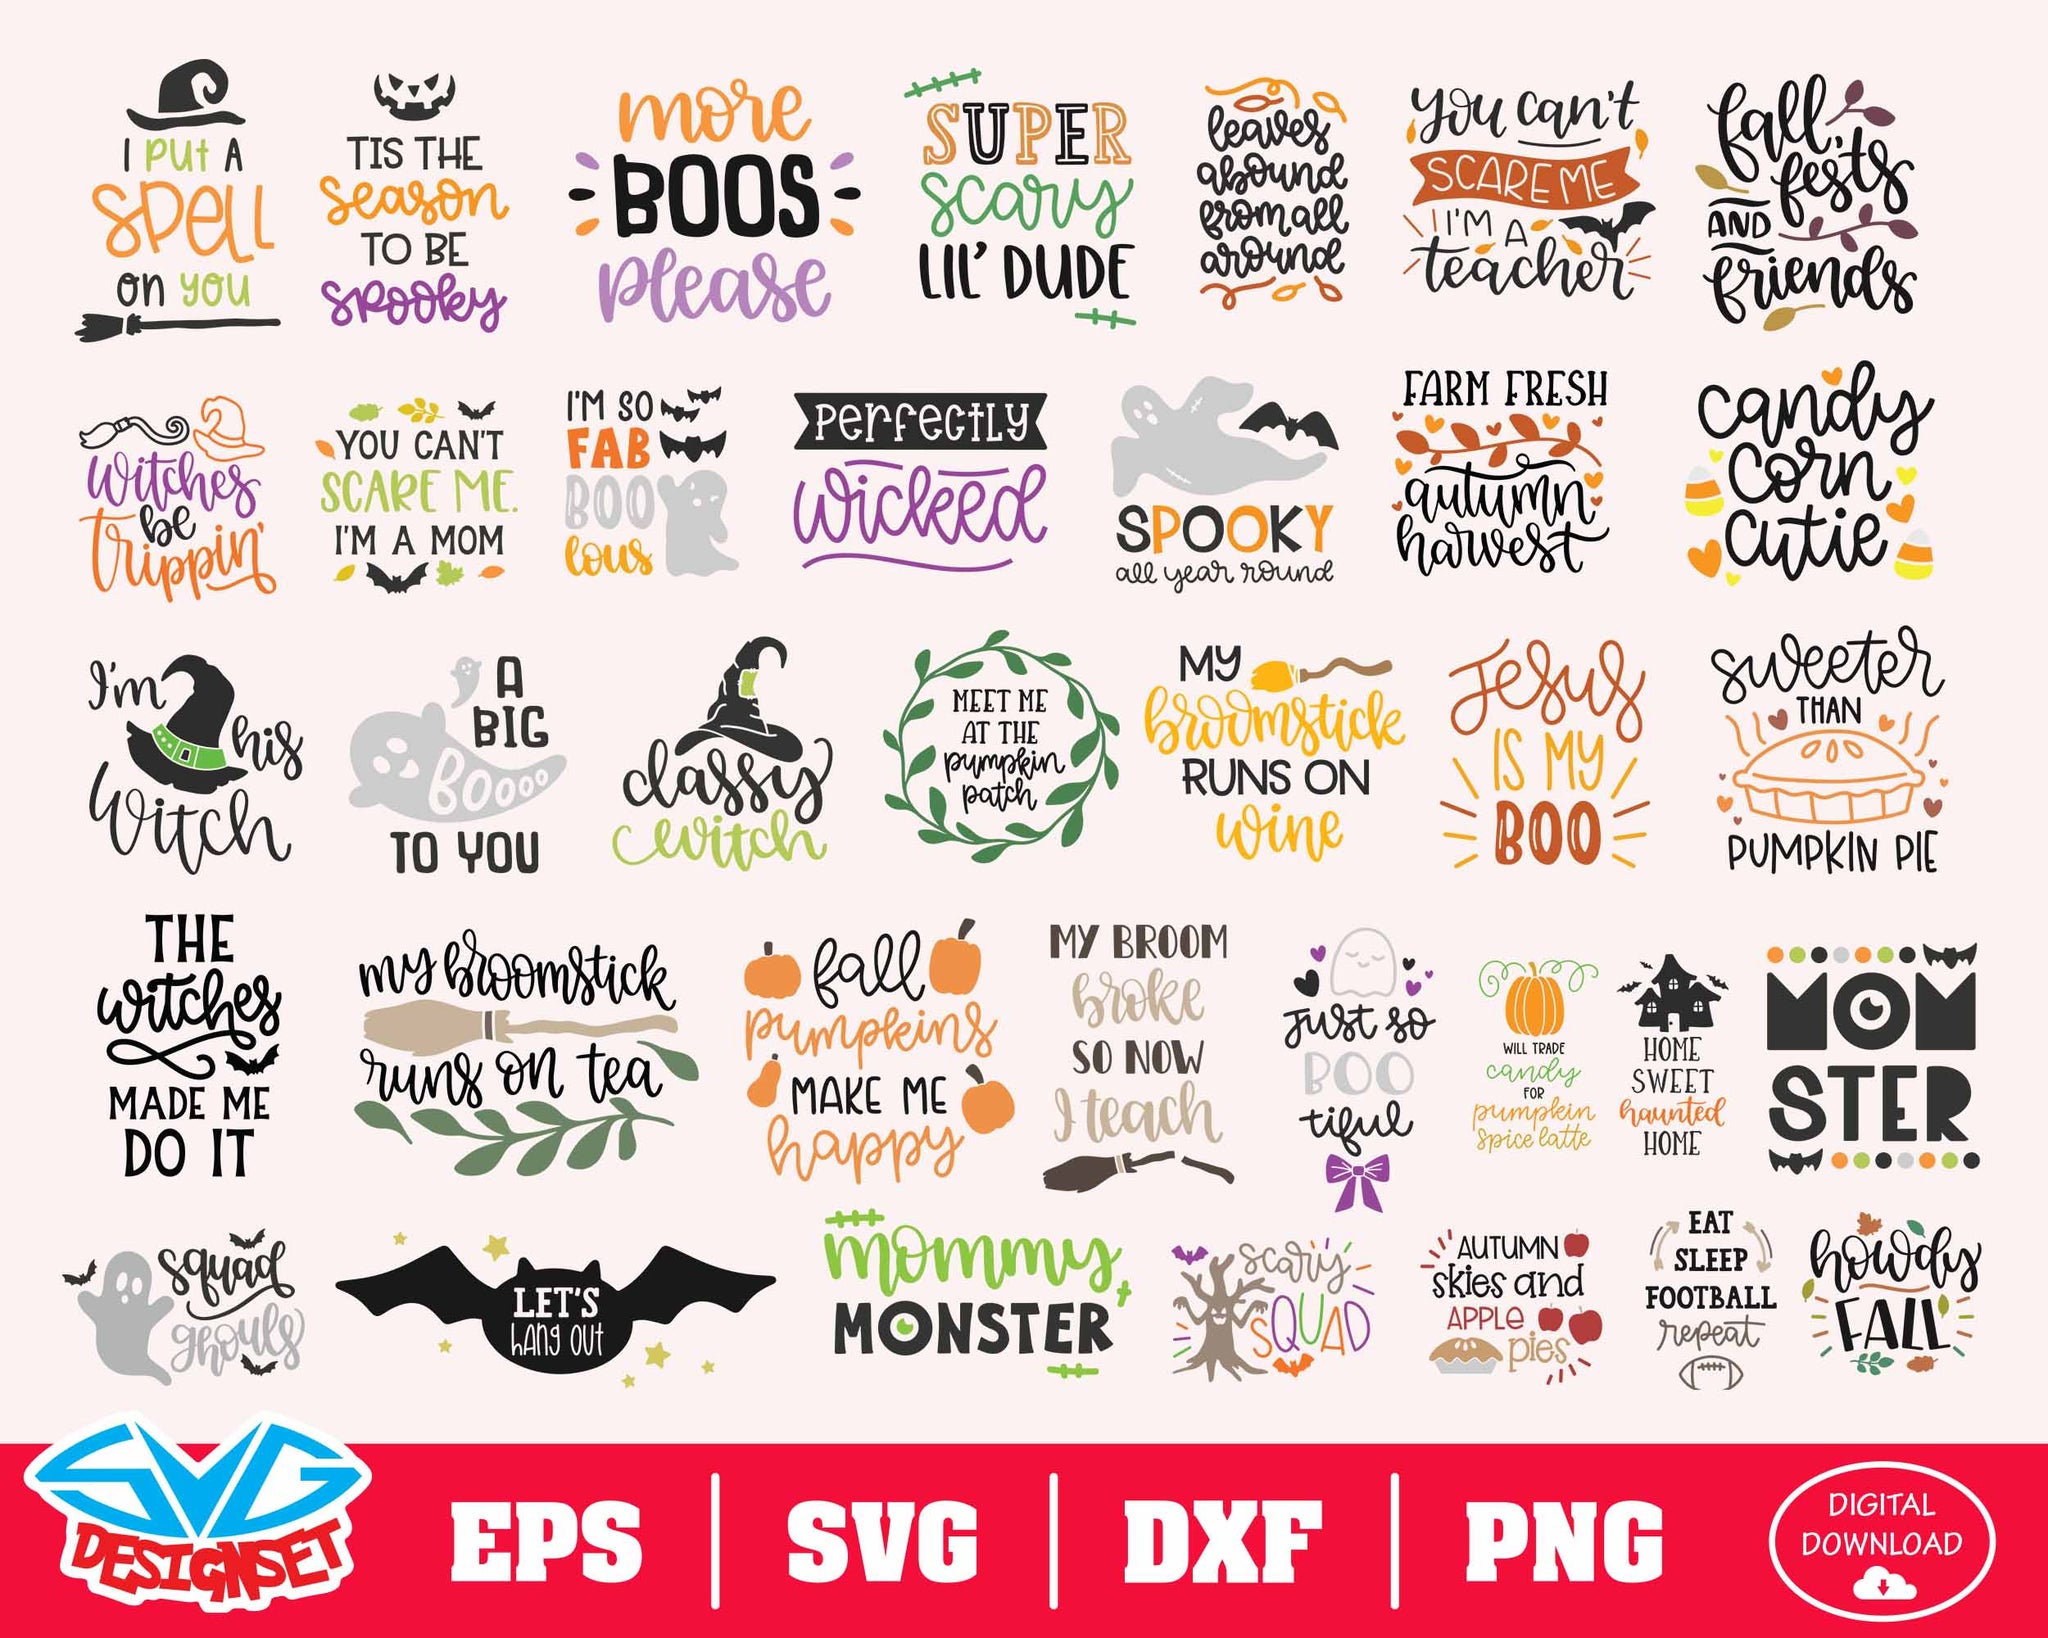 Halloween Bundle Svg, Dxf, Eps, Png, Clipart, Silhouette and Cutfiles #3 - SVGDesignSets